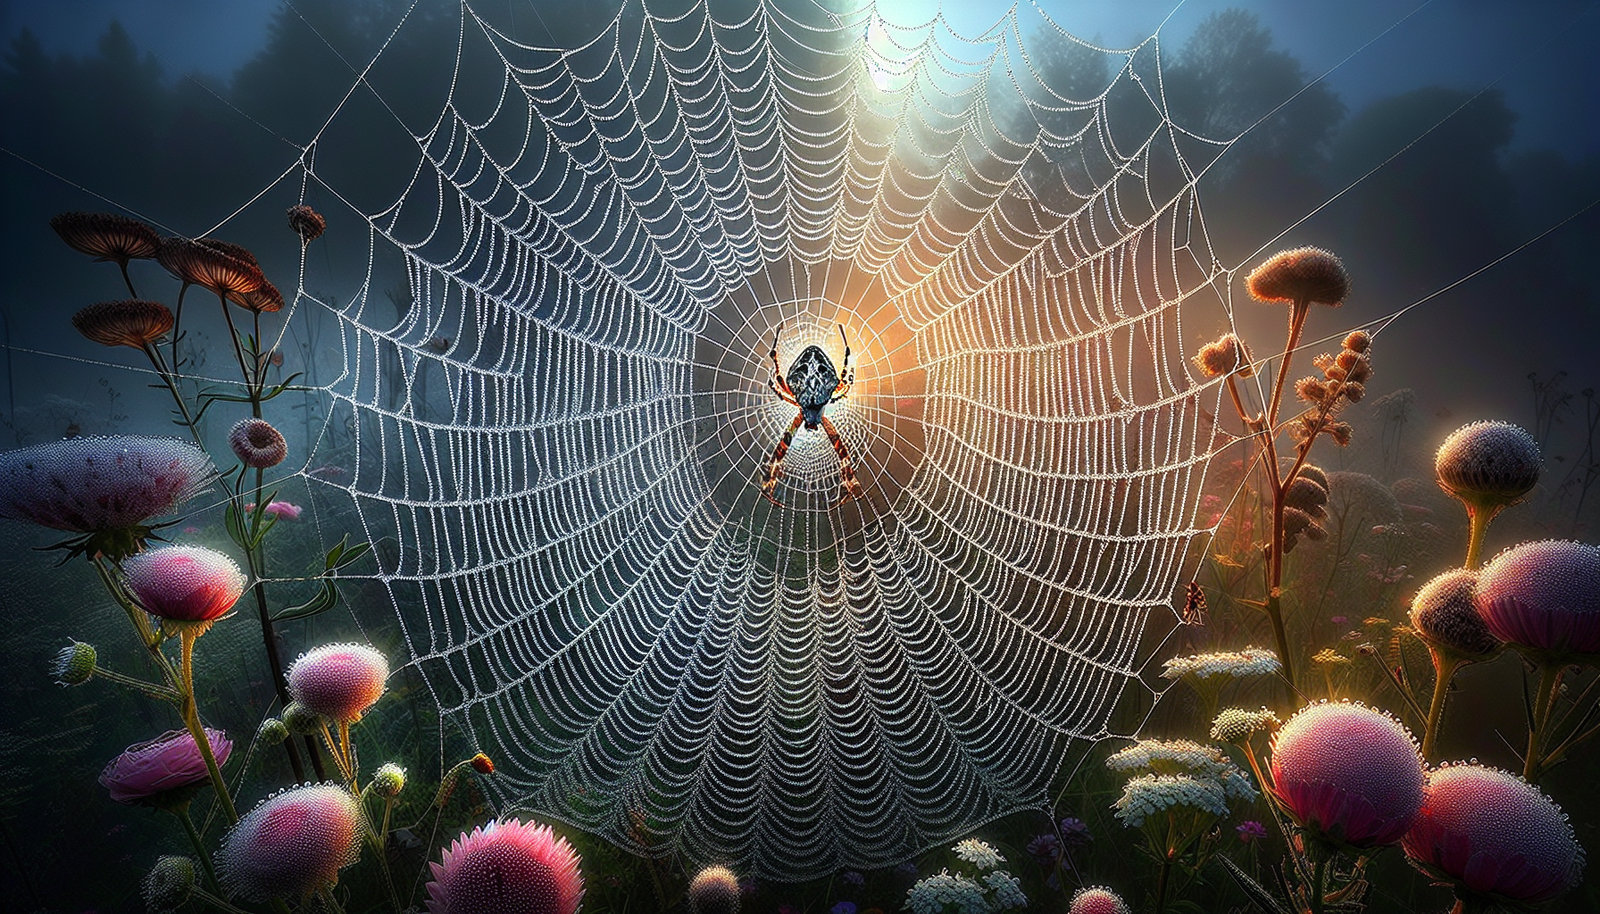 Can You Discuss The Intriguing Features Of The Delicate Garden Orb-weaving Spider?